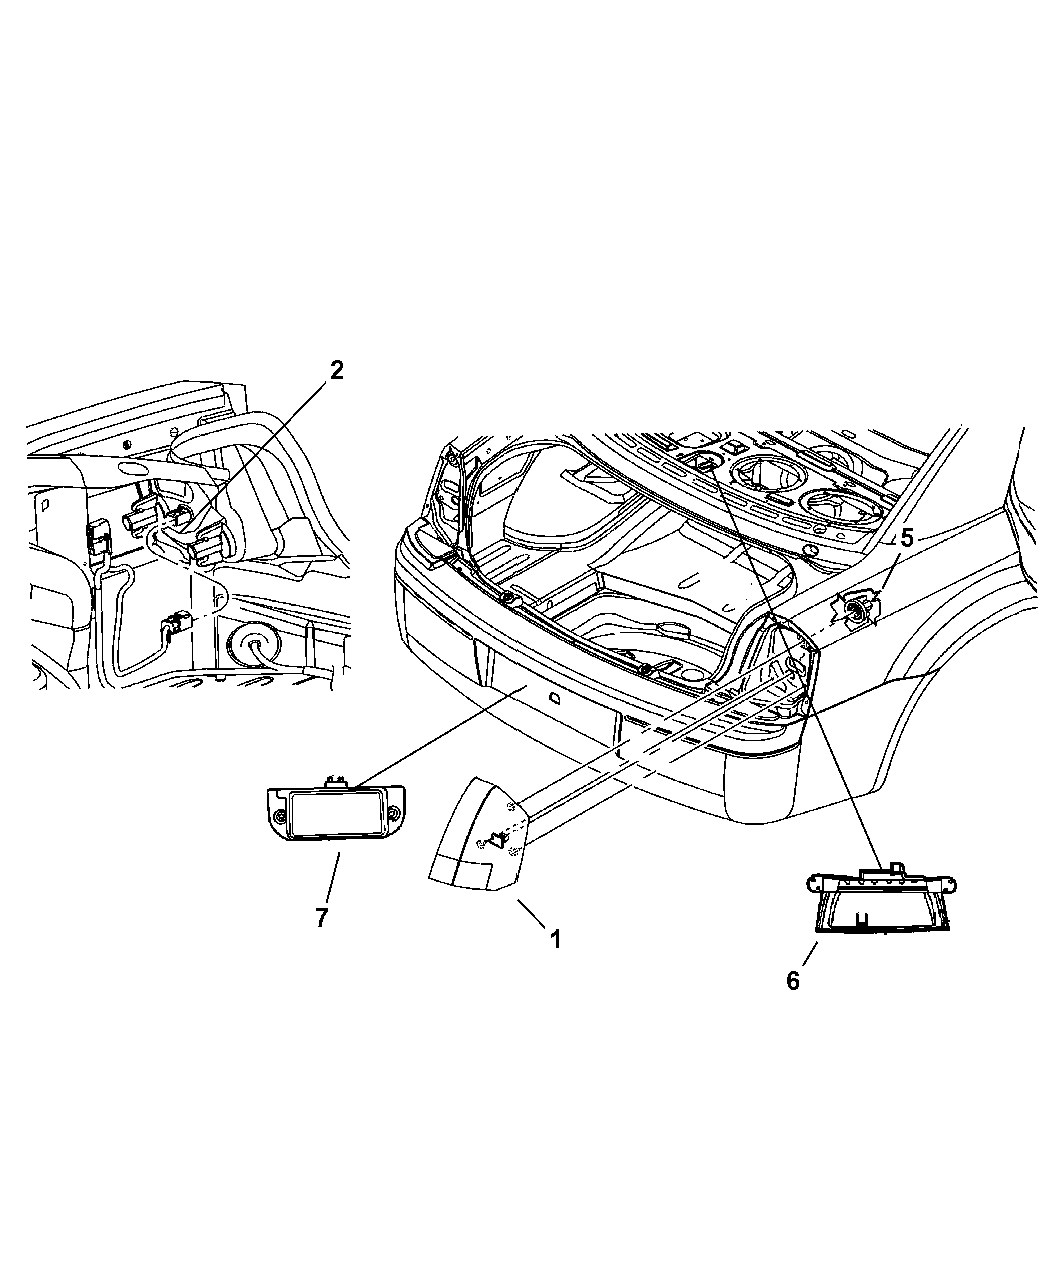 Circuit Electric For Guide: 2007 Dodge Charger Engine Diagram